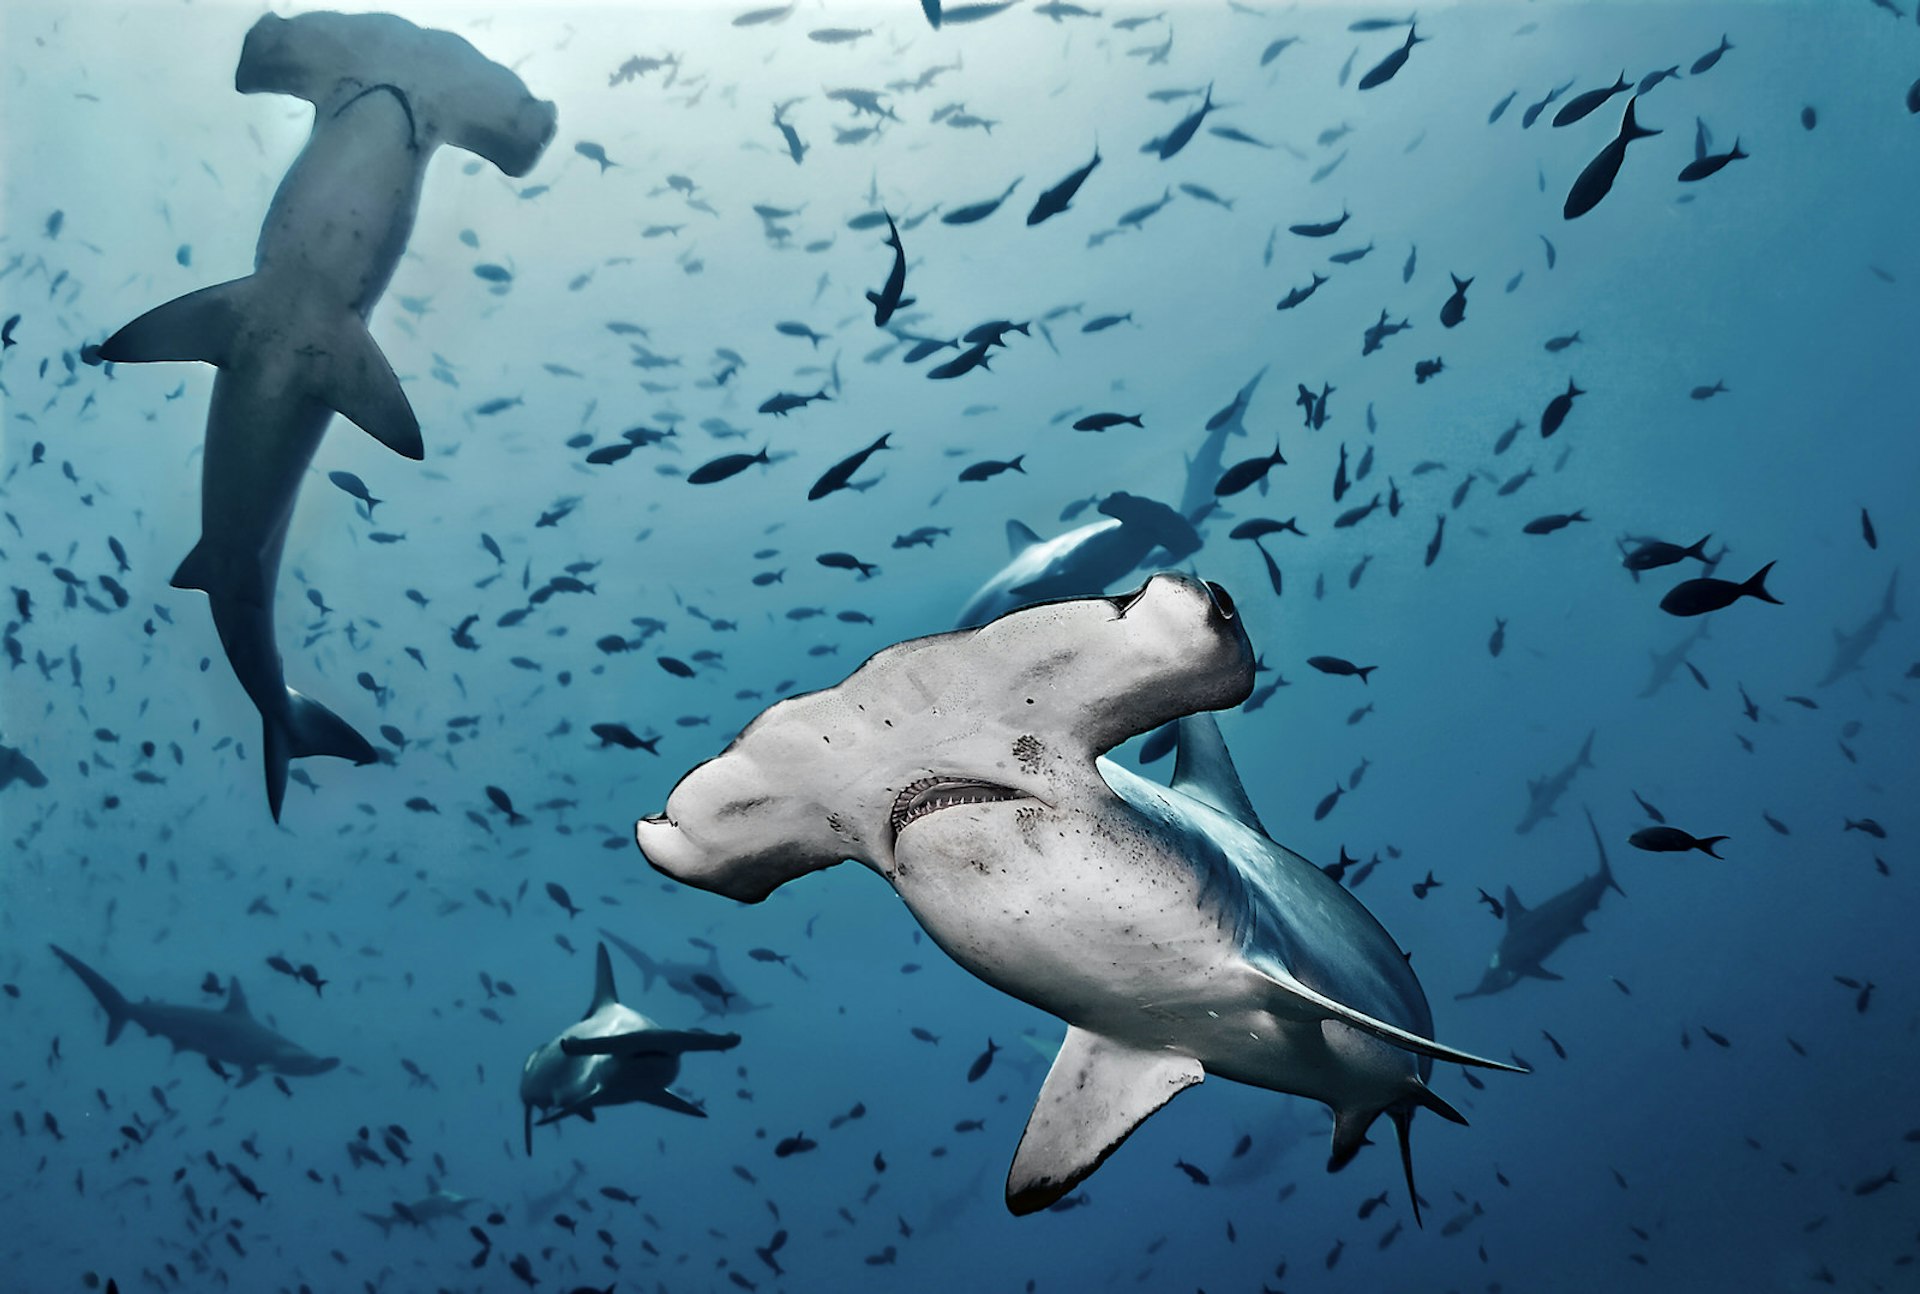 A shoal of hammerhead sharks surrounded by small fish